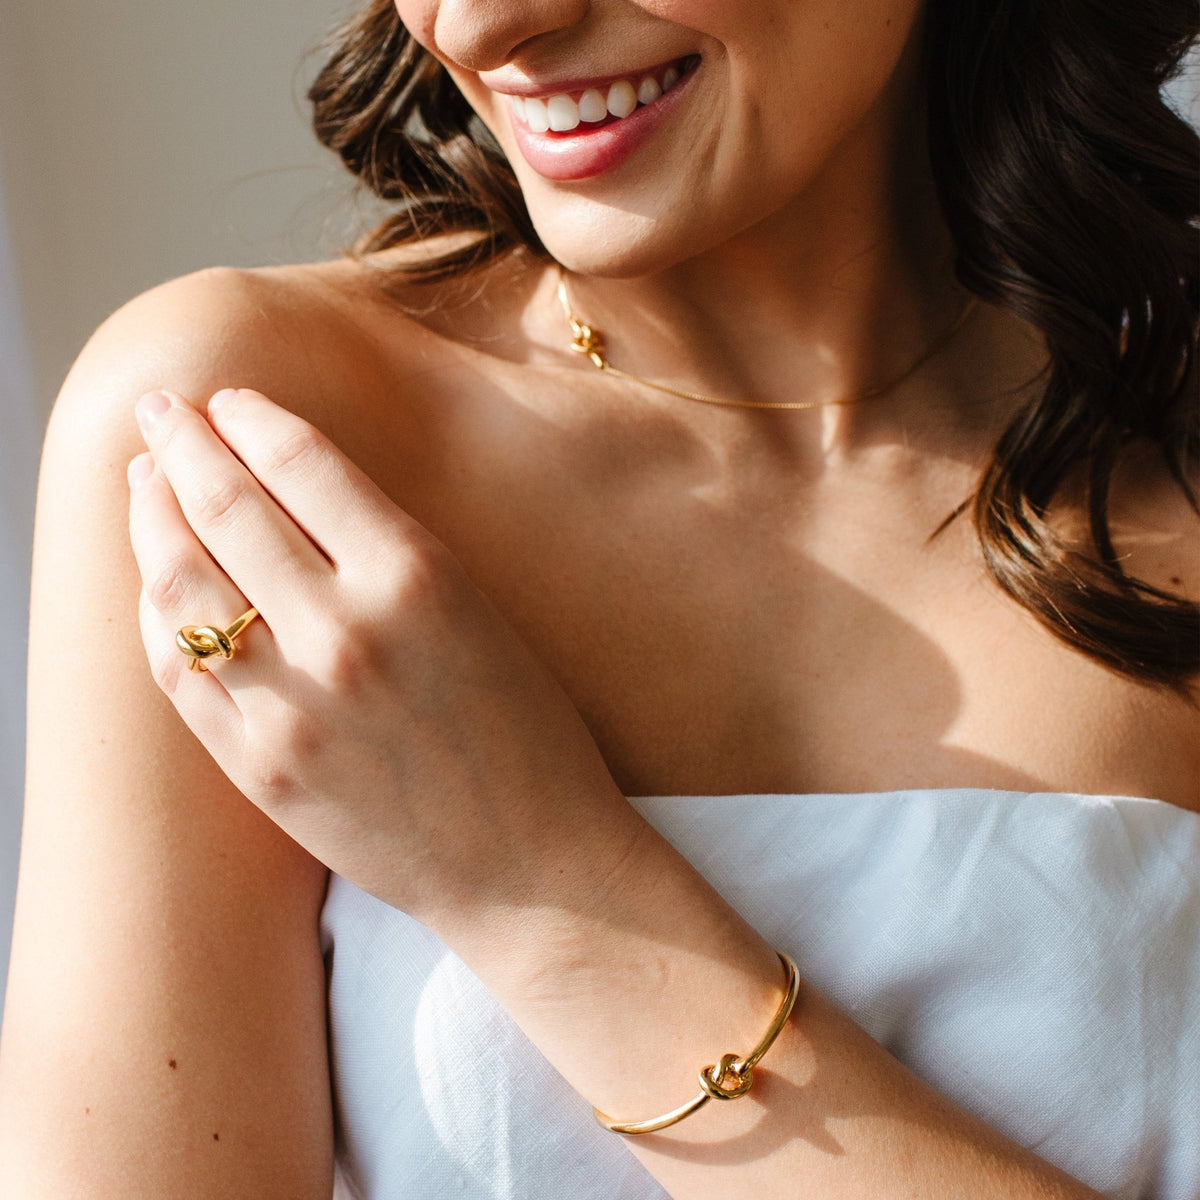 POISE KNOT COCKTAIL RING - GOLD - SO PRETTY CARA COTTER